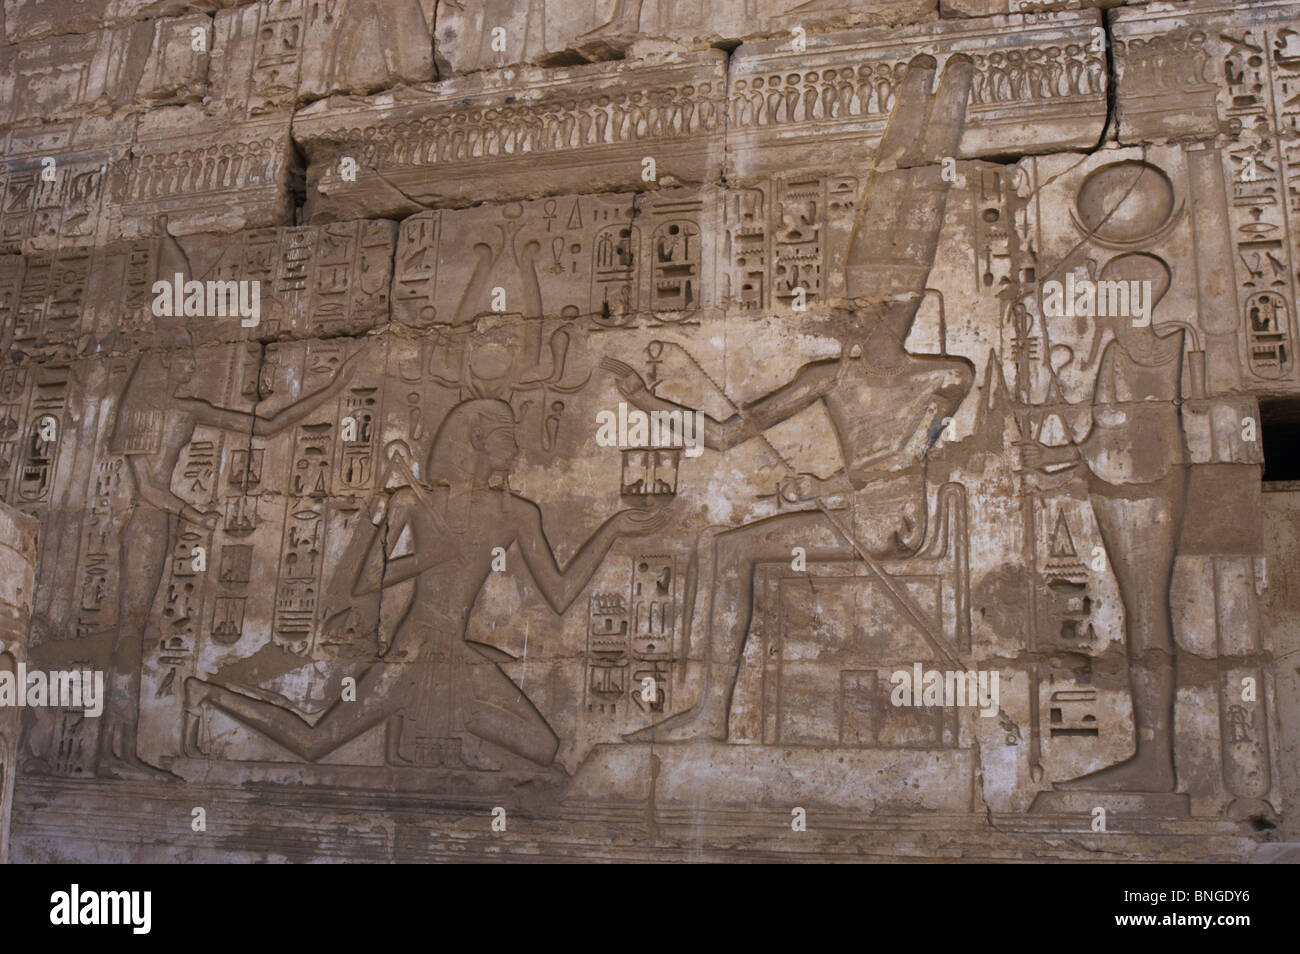 Temple of Ramses III. Pharaoh between Amun and Ptah. Medinet-Habou. Egypt. Stock Photo